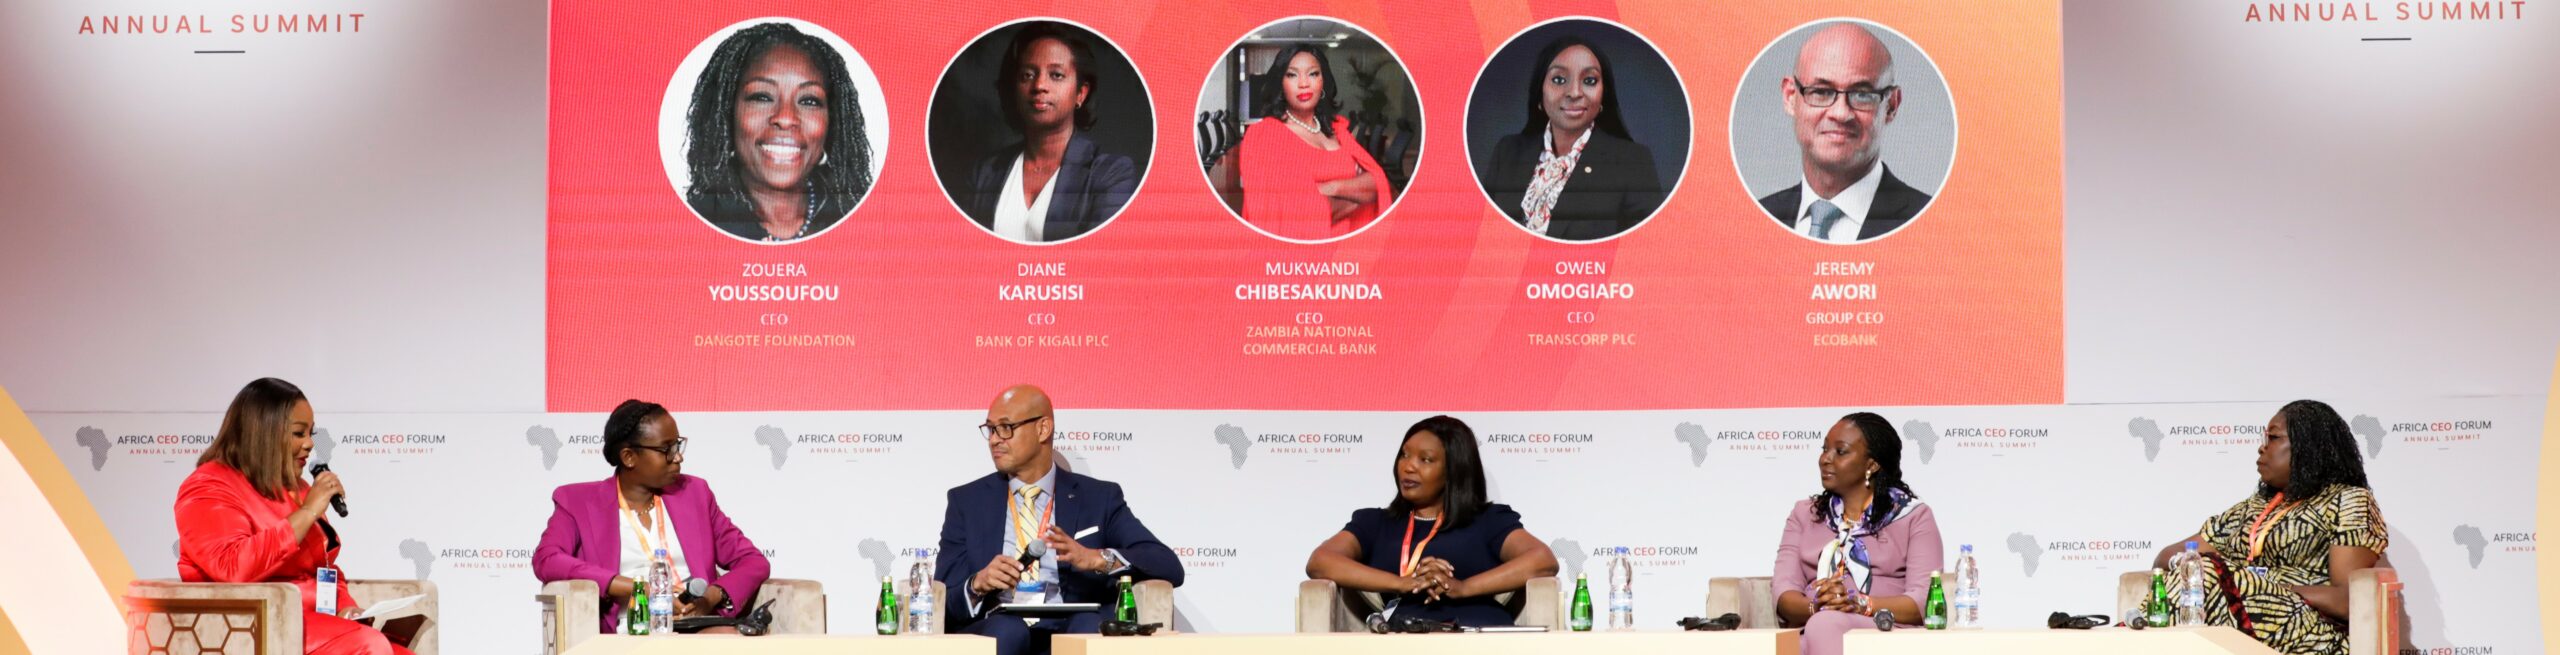 A l'AFRICA CEO FORUM Women working for Change